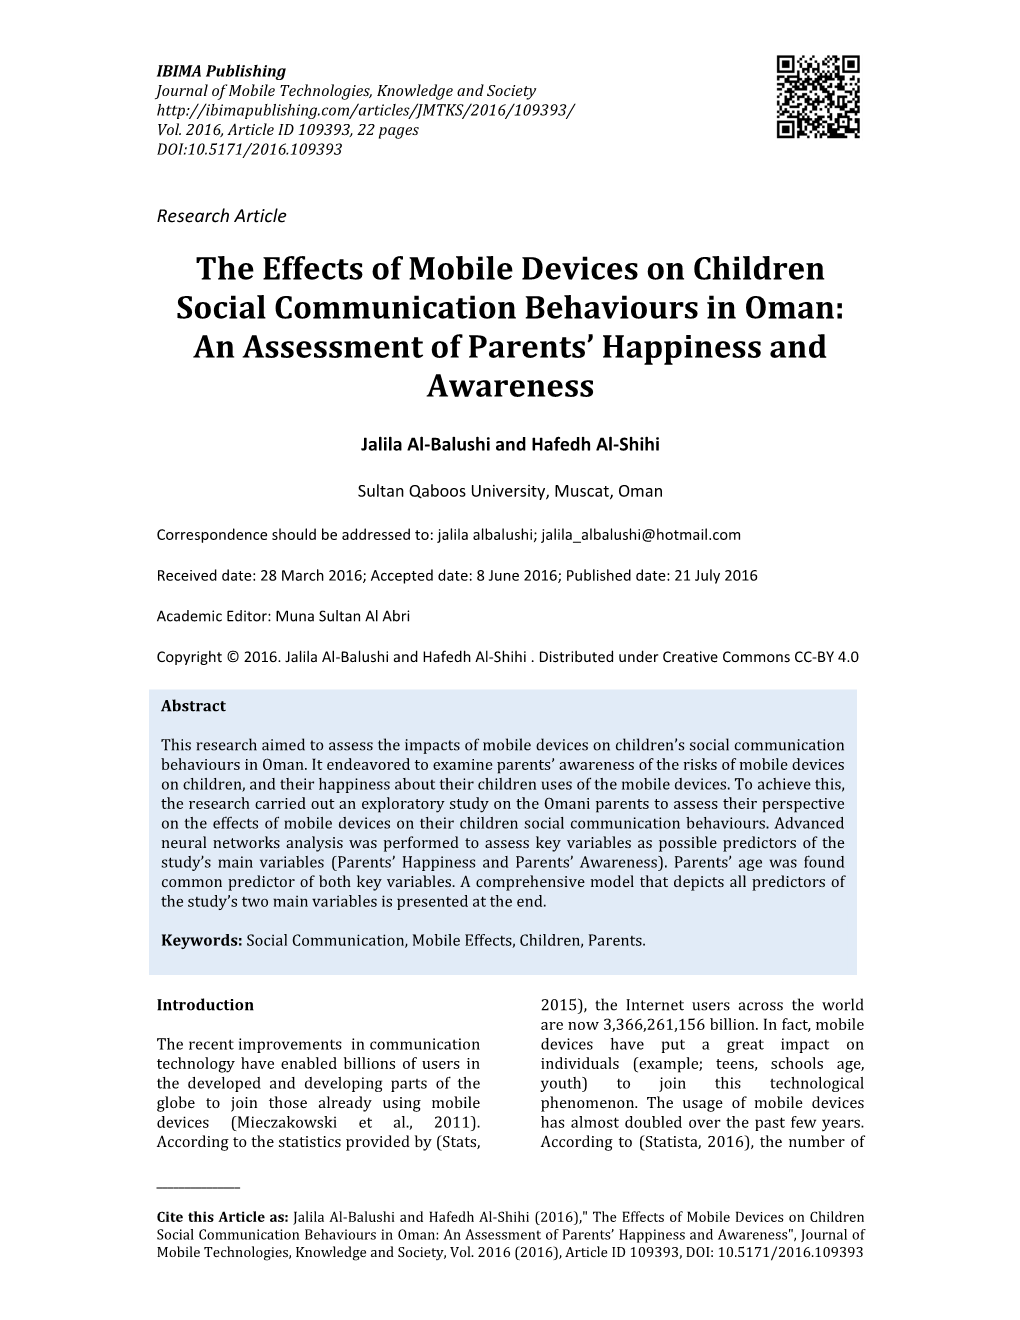 The Effects of Mobile Devices on Children Social Communication Behaviours in Oman: an Assessment of Parents’ Happiness and Awareness